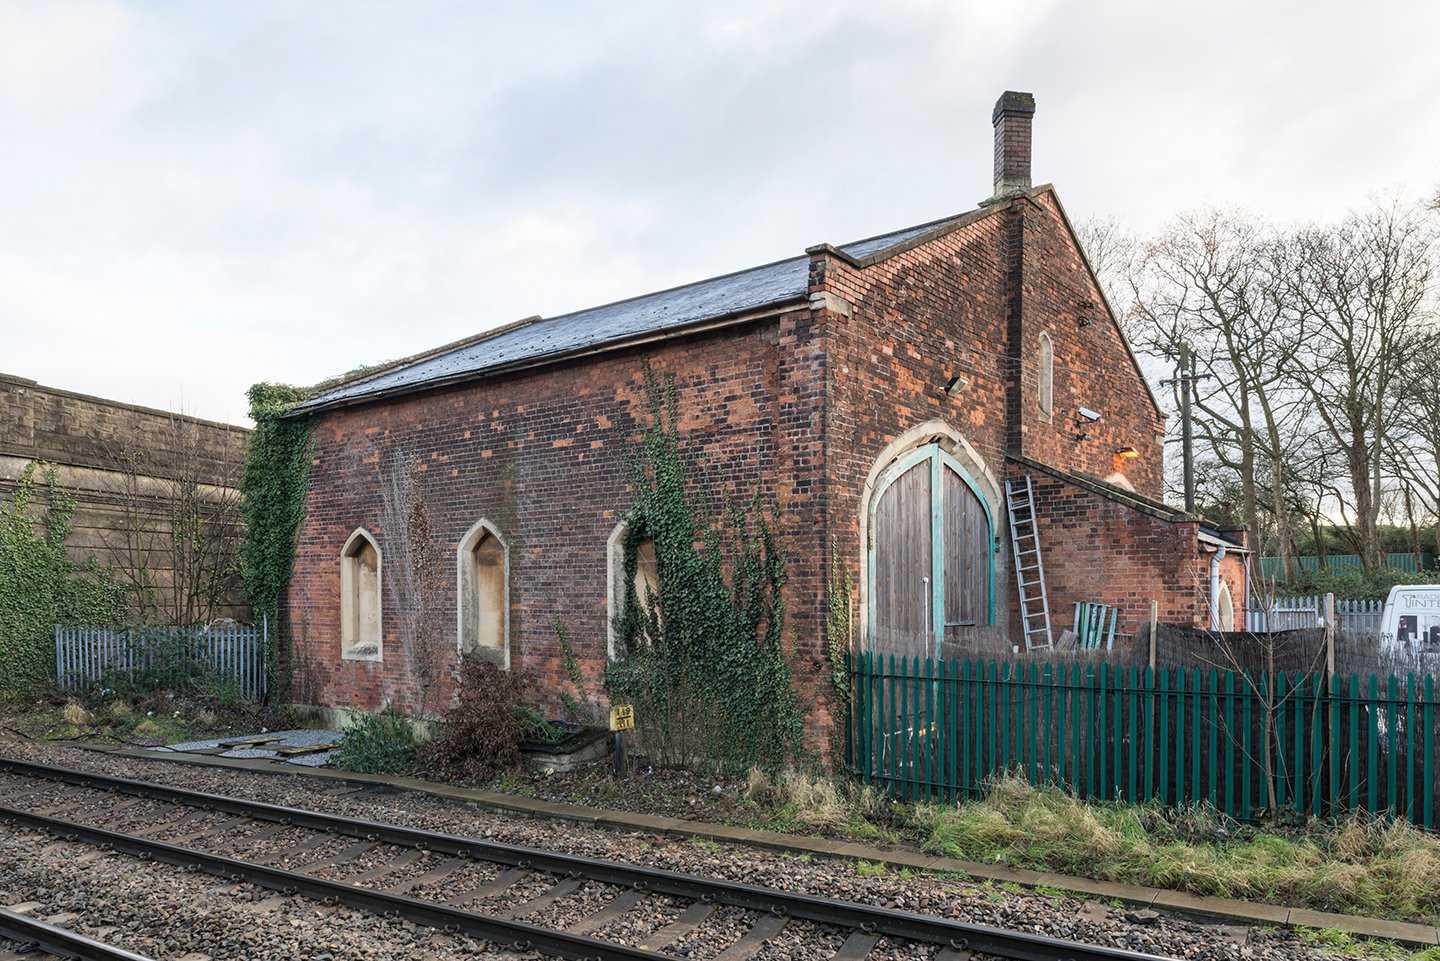 Yate (1844), the only survivor of Brunel's small Gothic goods sheds put up a wayward stations.